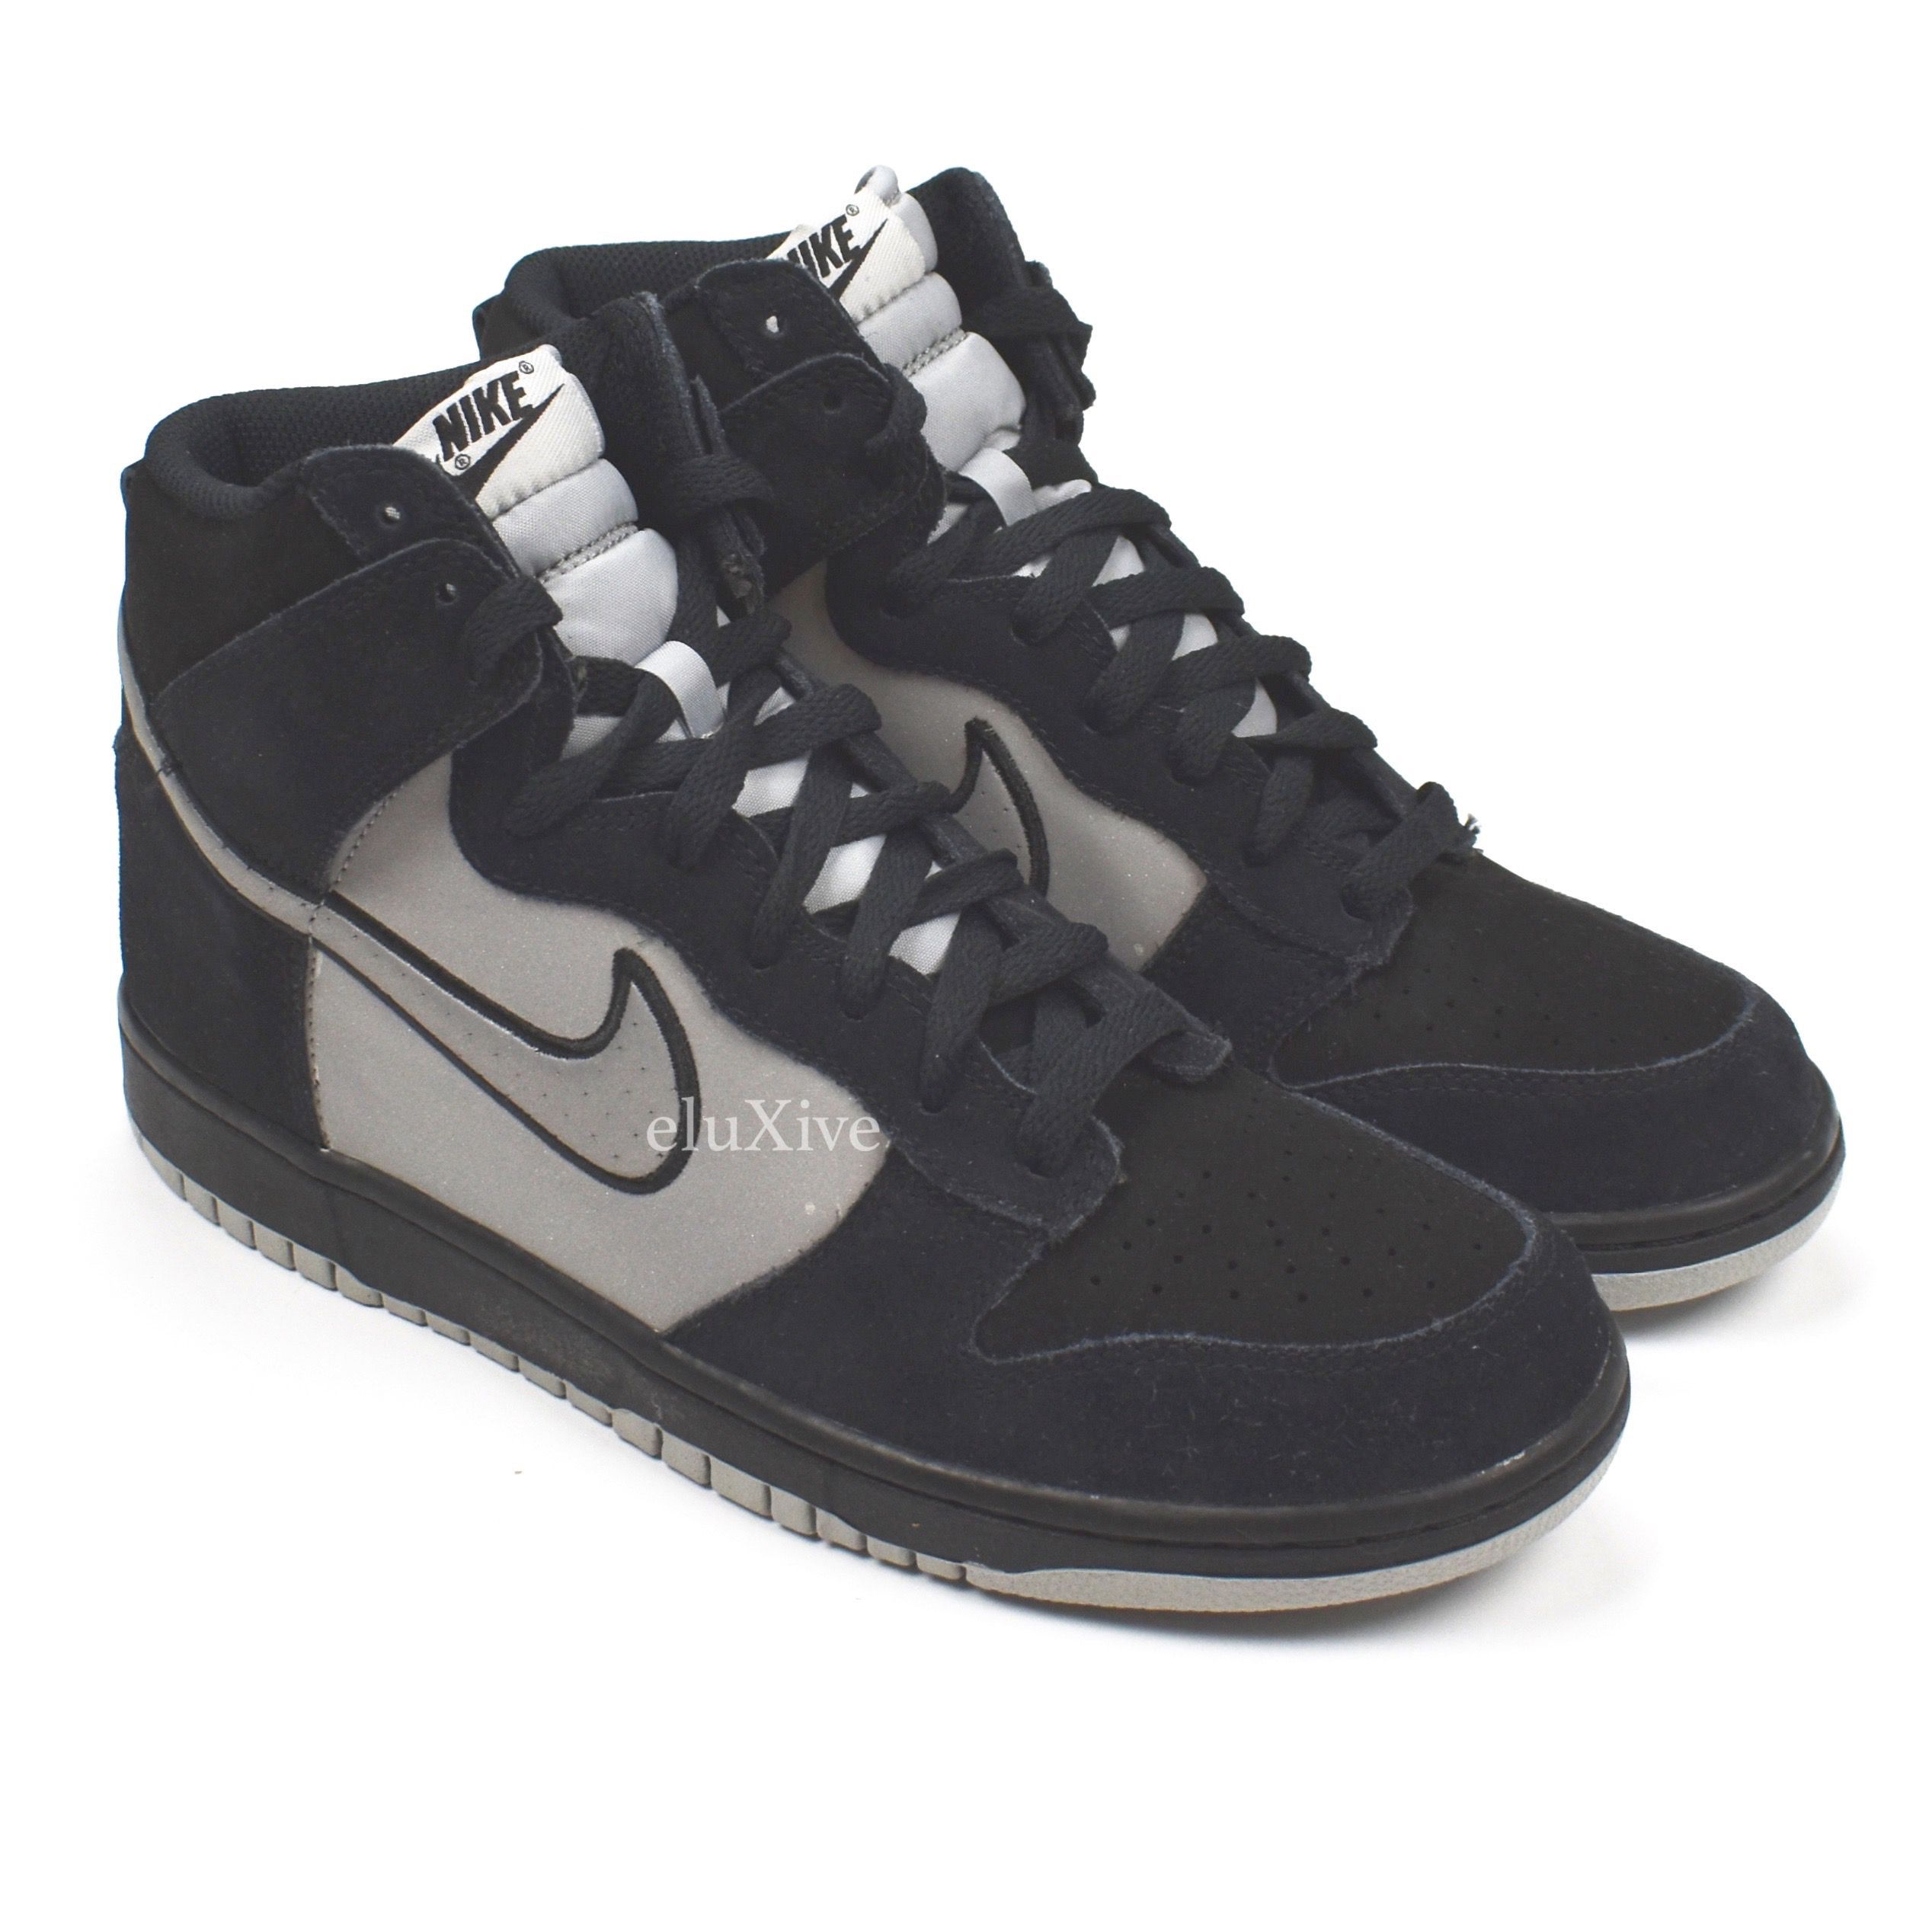 Pre-owned Nike Dunk High Black Reflective Silver Ds Shoes